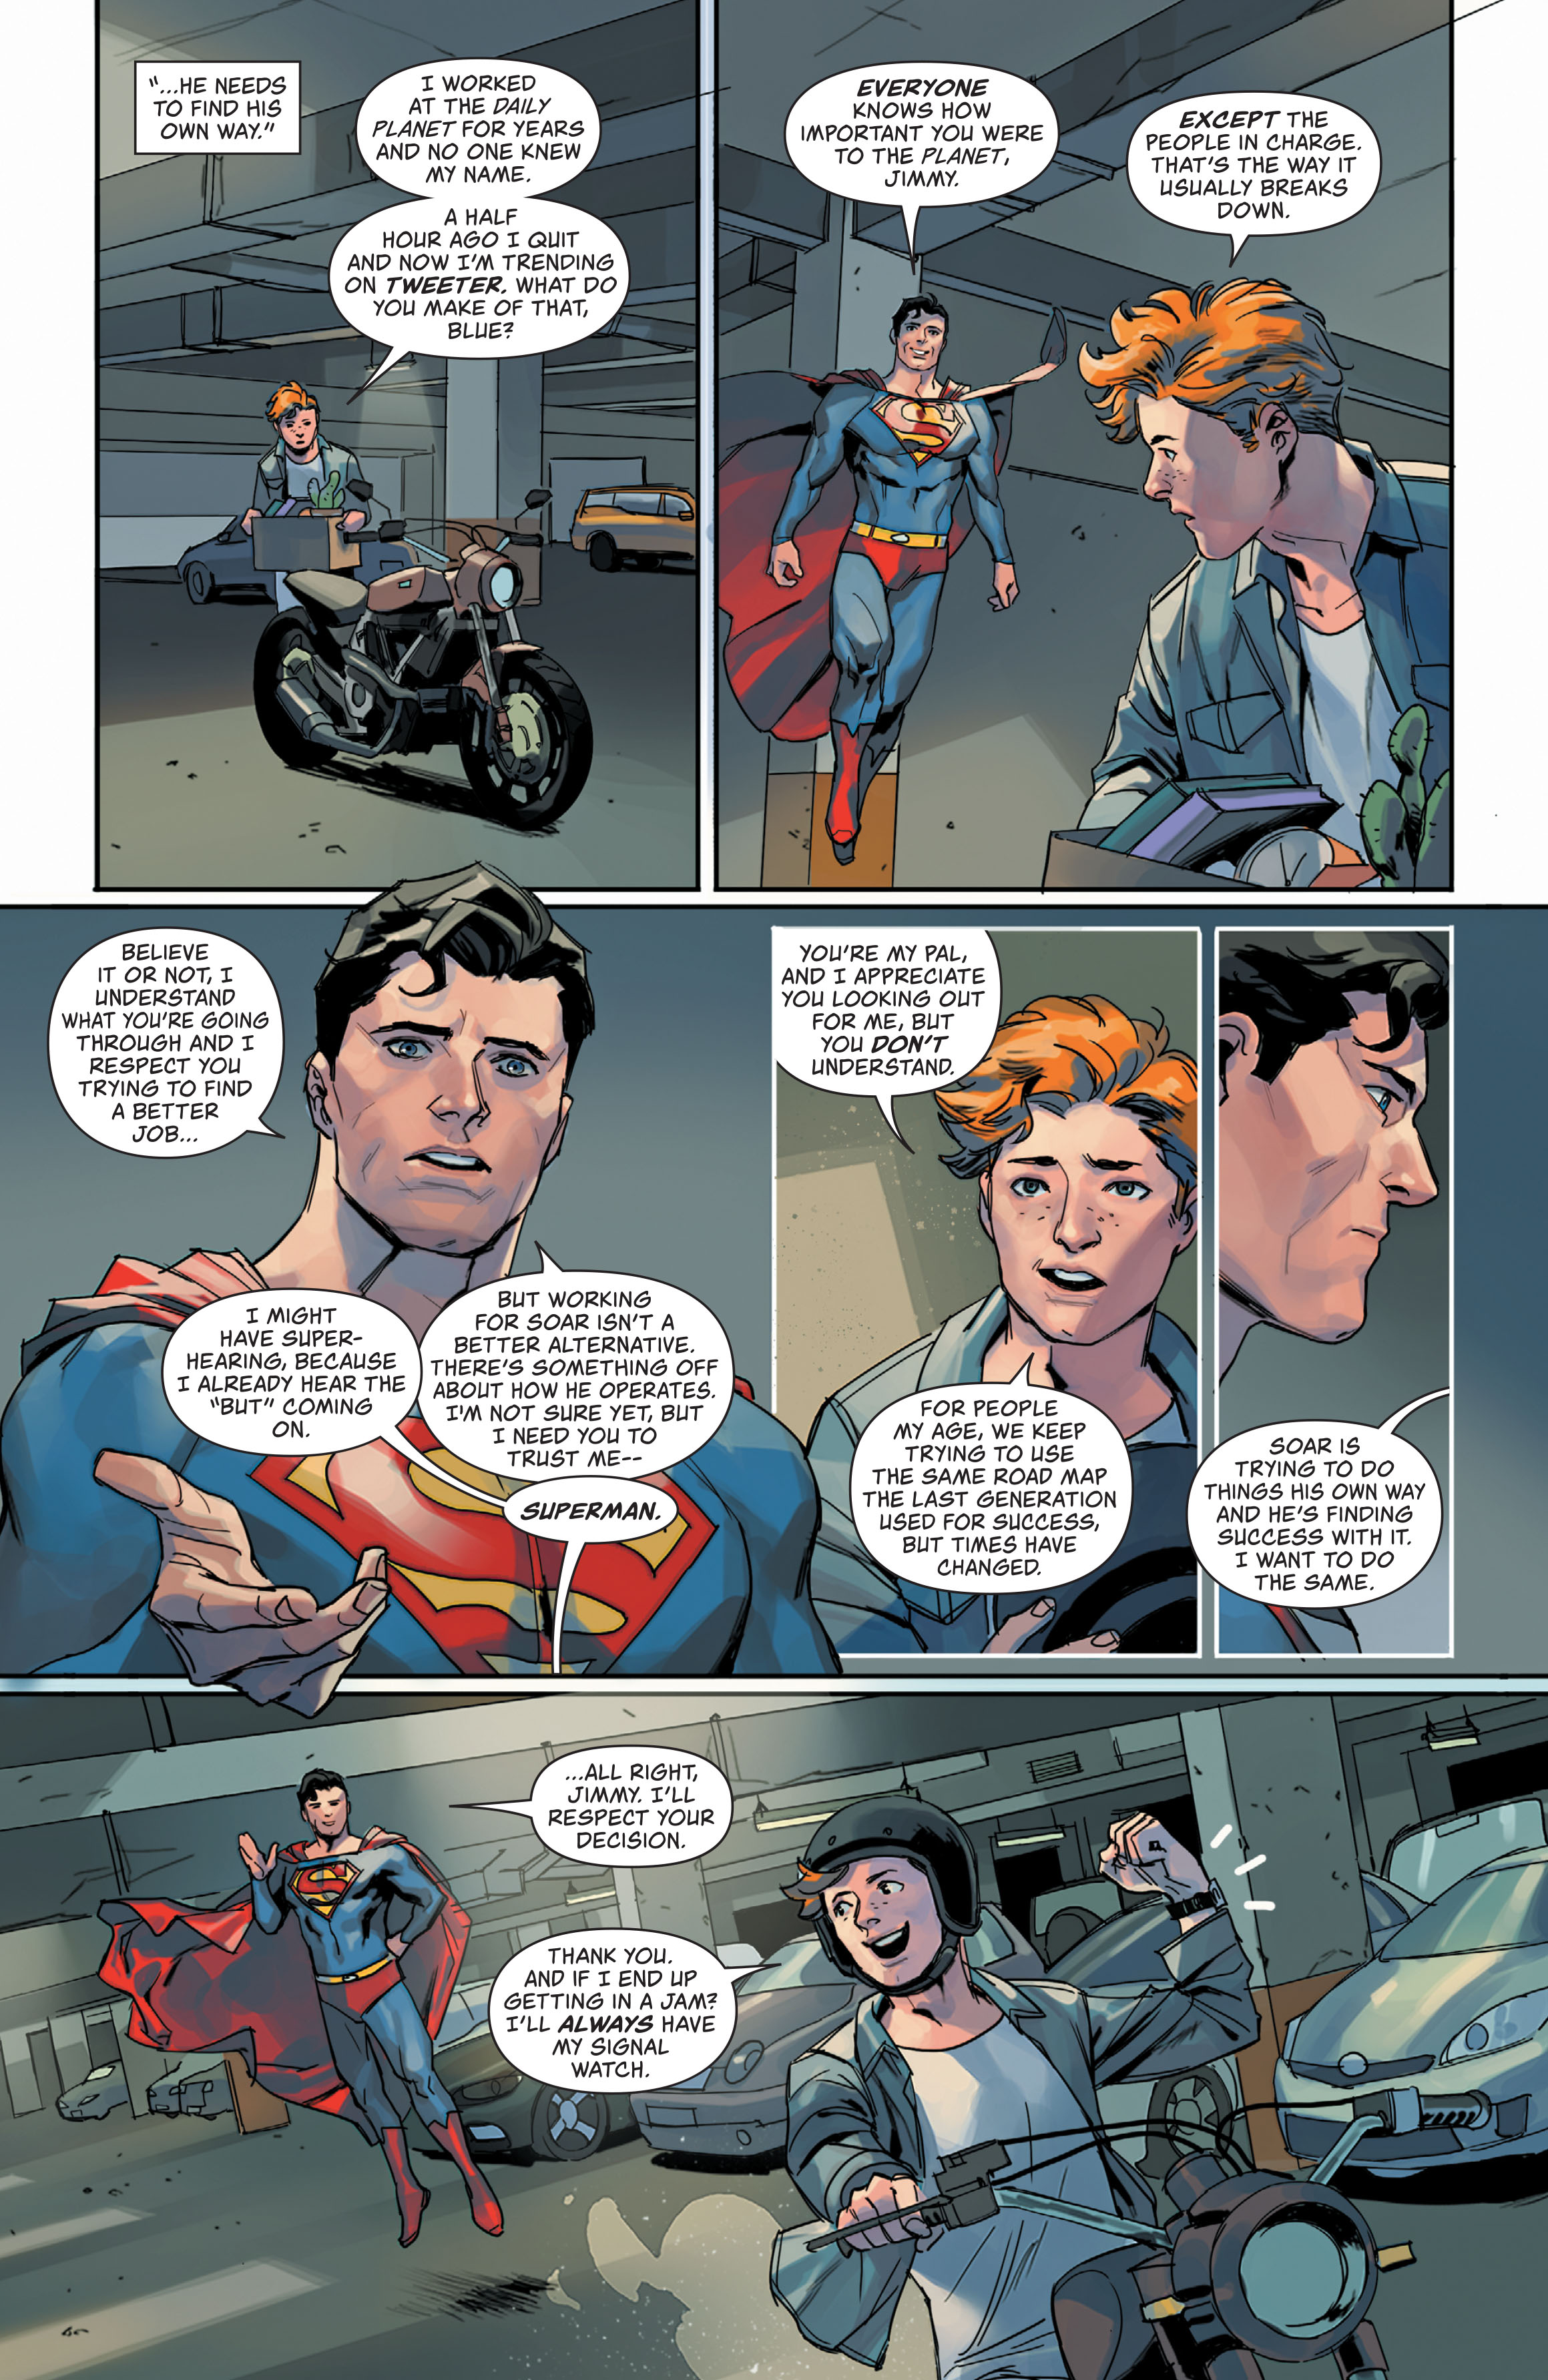 Superman: Man of Tomorrow (2020-): Chapter 7 - Page 3